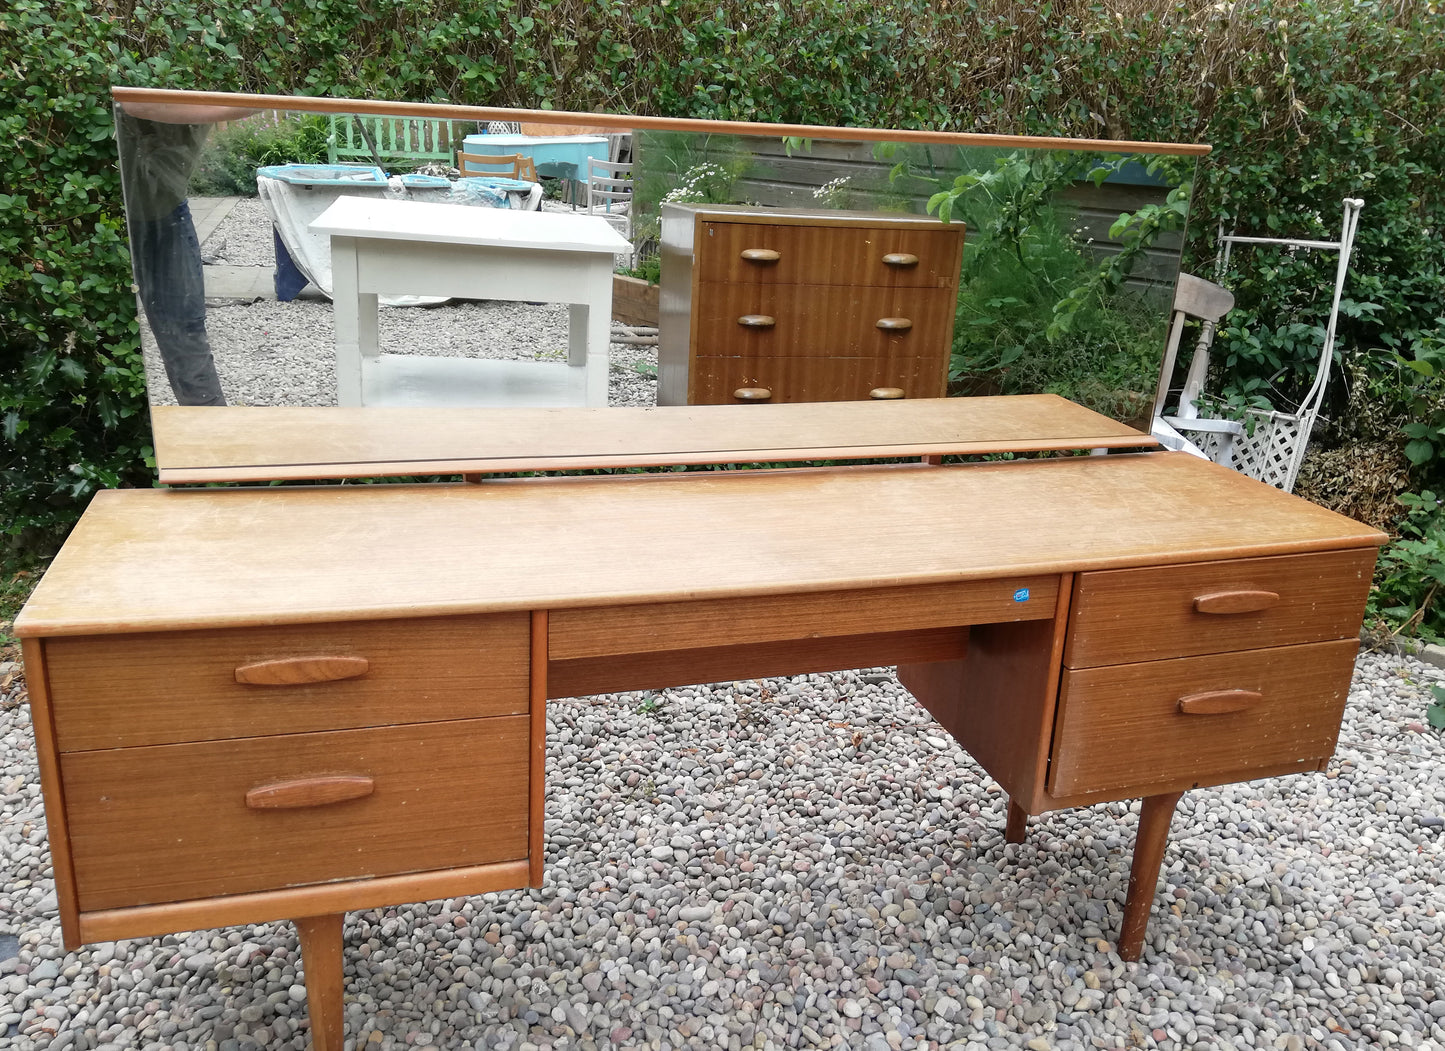 Vintage G Plan Dressing Table - to have it painted please contact me to discuss what you would like.